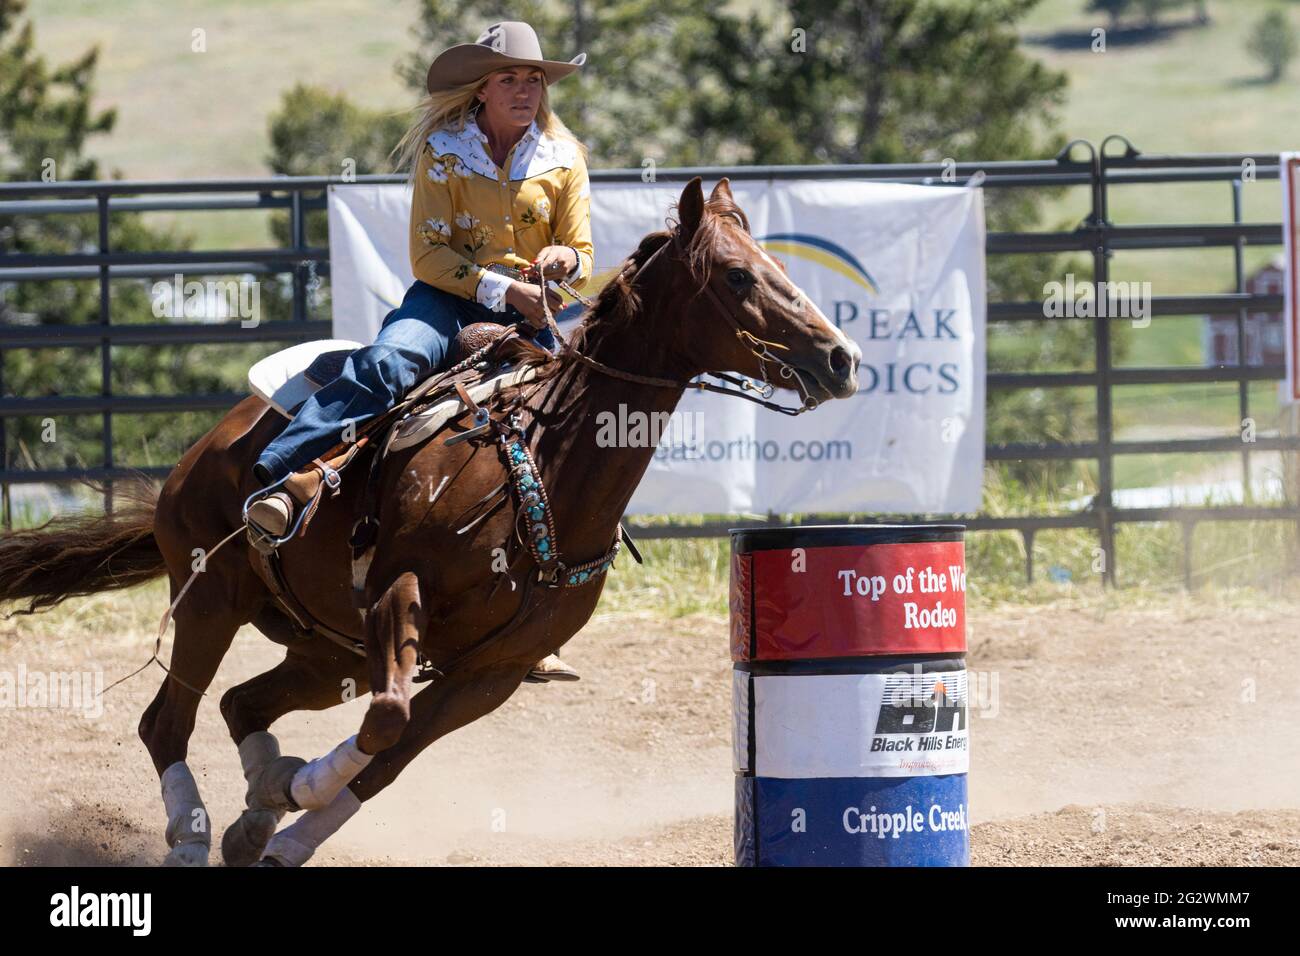 Rodeo events from the 2021 Top of the World Rodeo, elevation 9600 feet, Cripple Creek Colorado Stock Photo